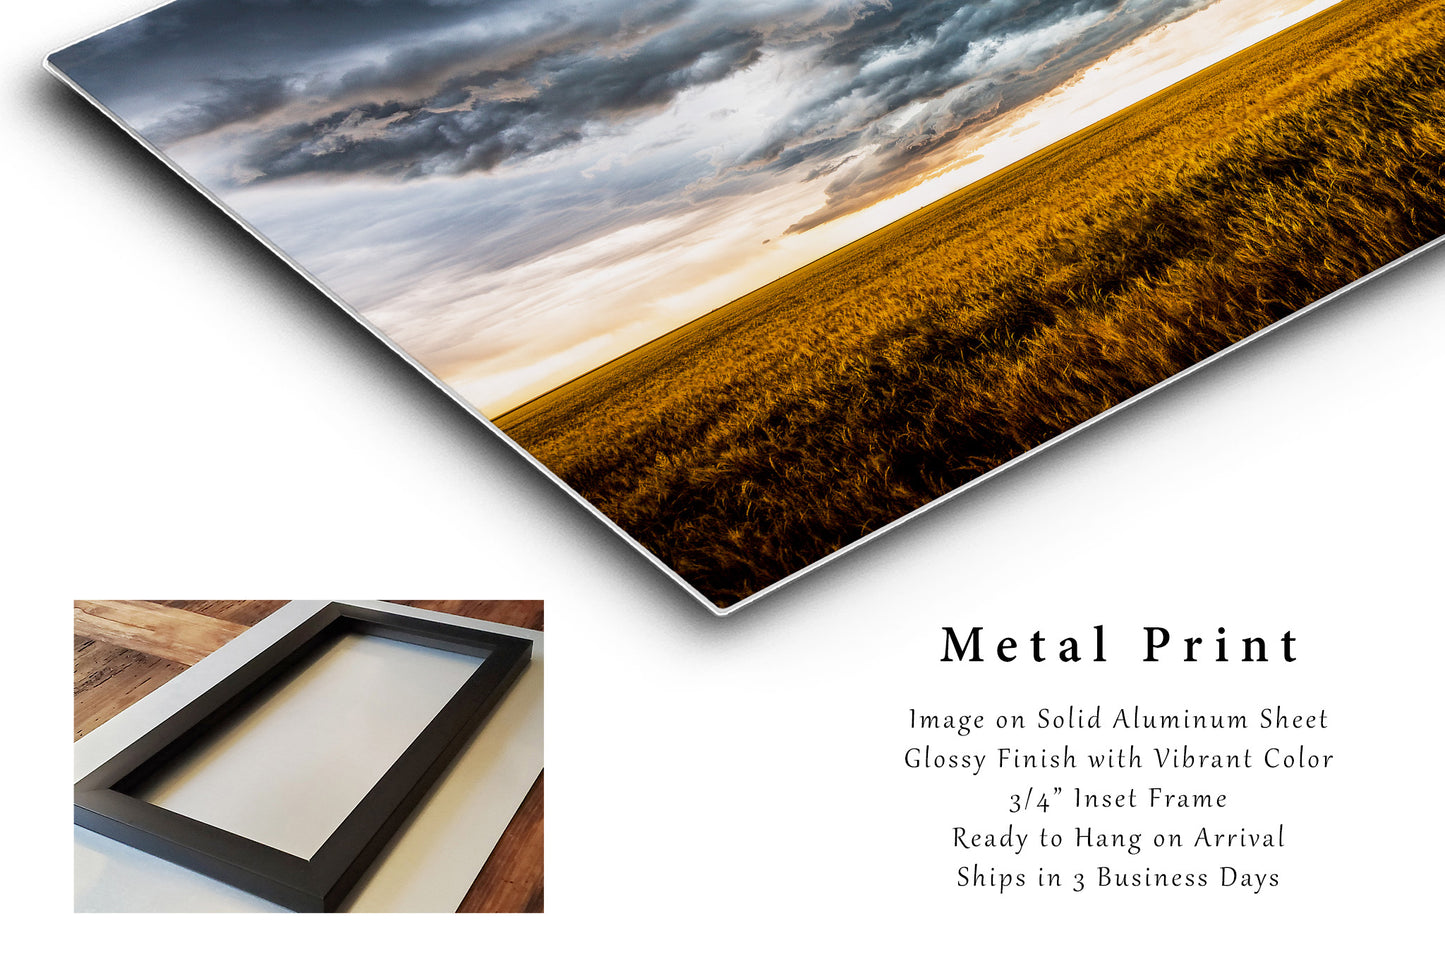 Storm Print on Metal - Aluminum Wall Art of Thunderstorm Over Amber Wheat Field on Spring Day in Colorado - Landscape Photo Artwork Decor